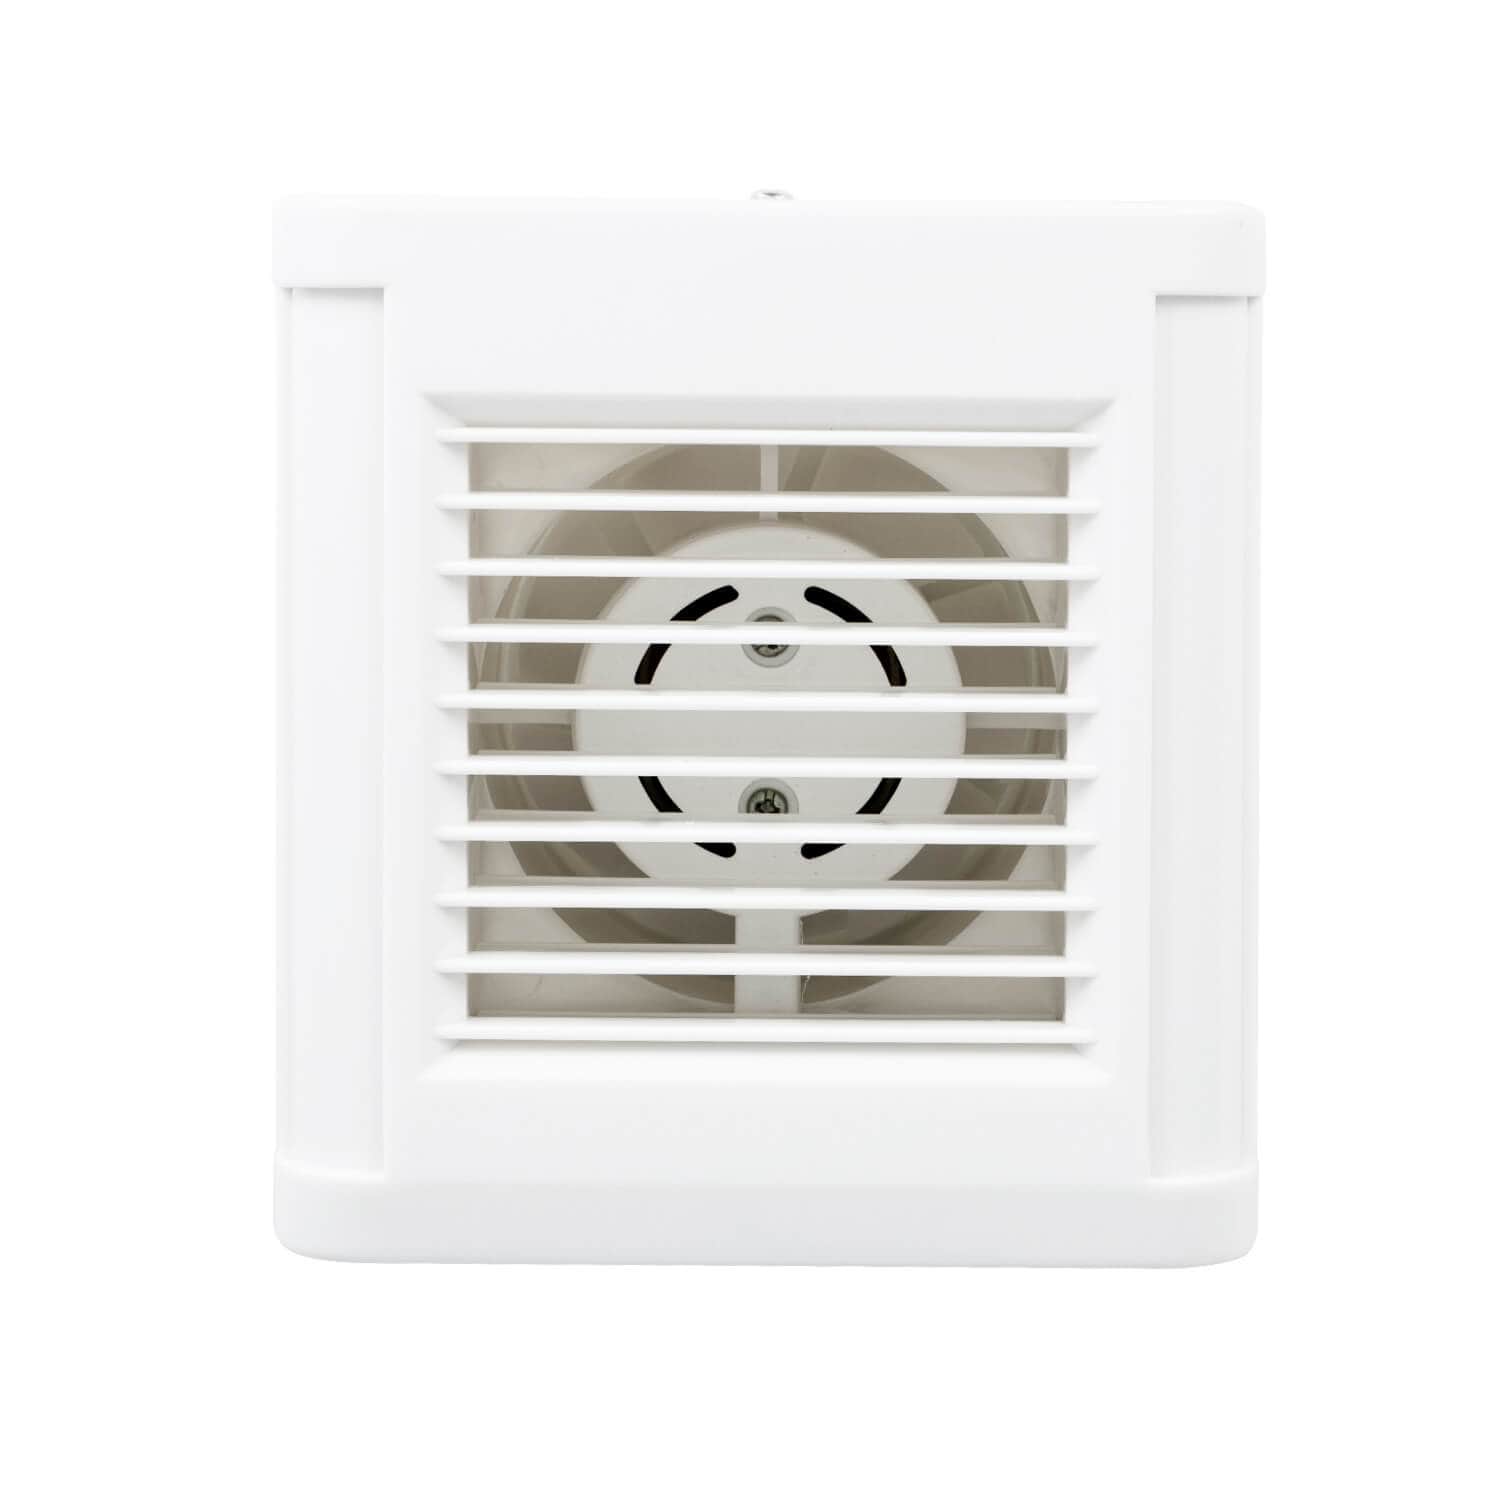 4 Inch Exhaust Fan with Auto Louvers 47 CFM